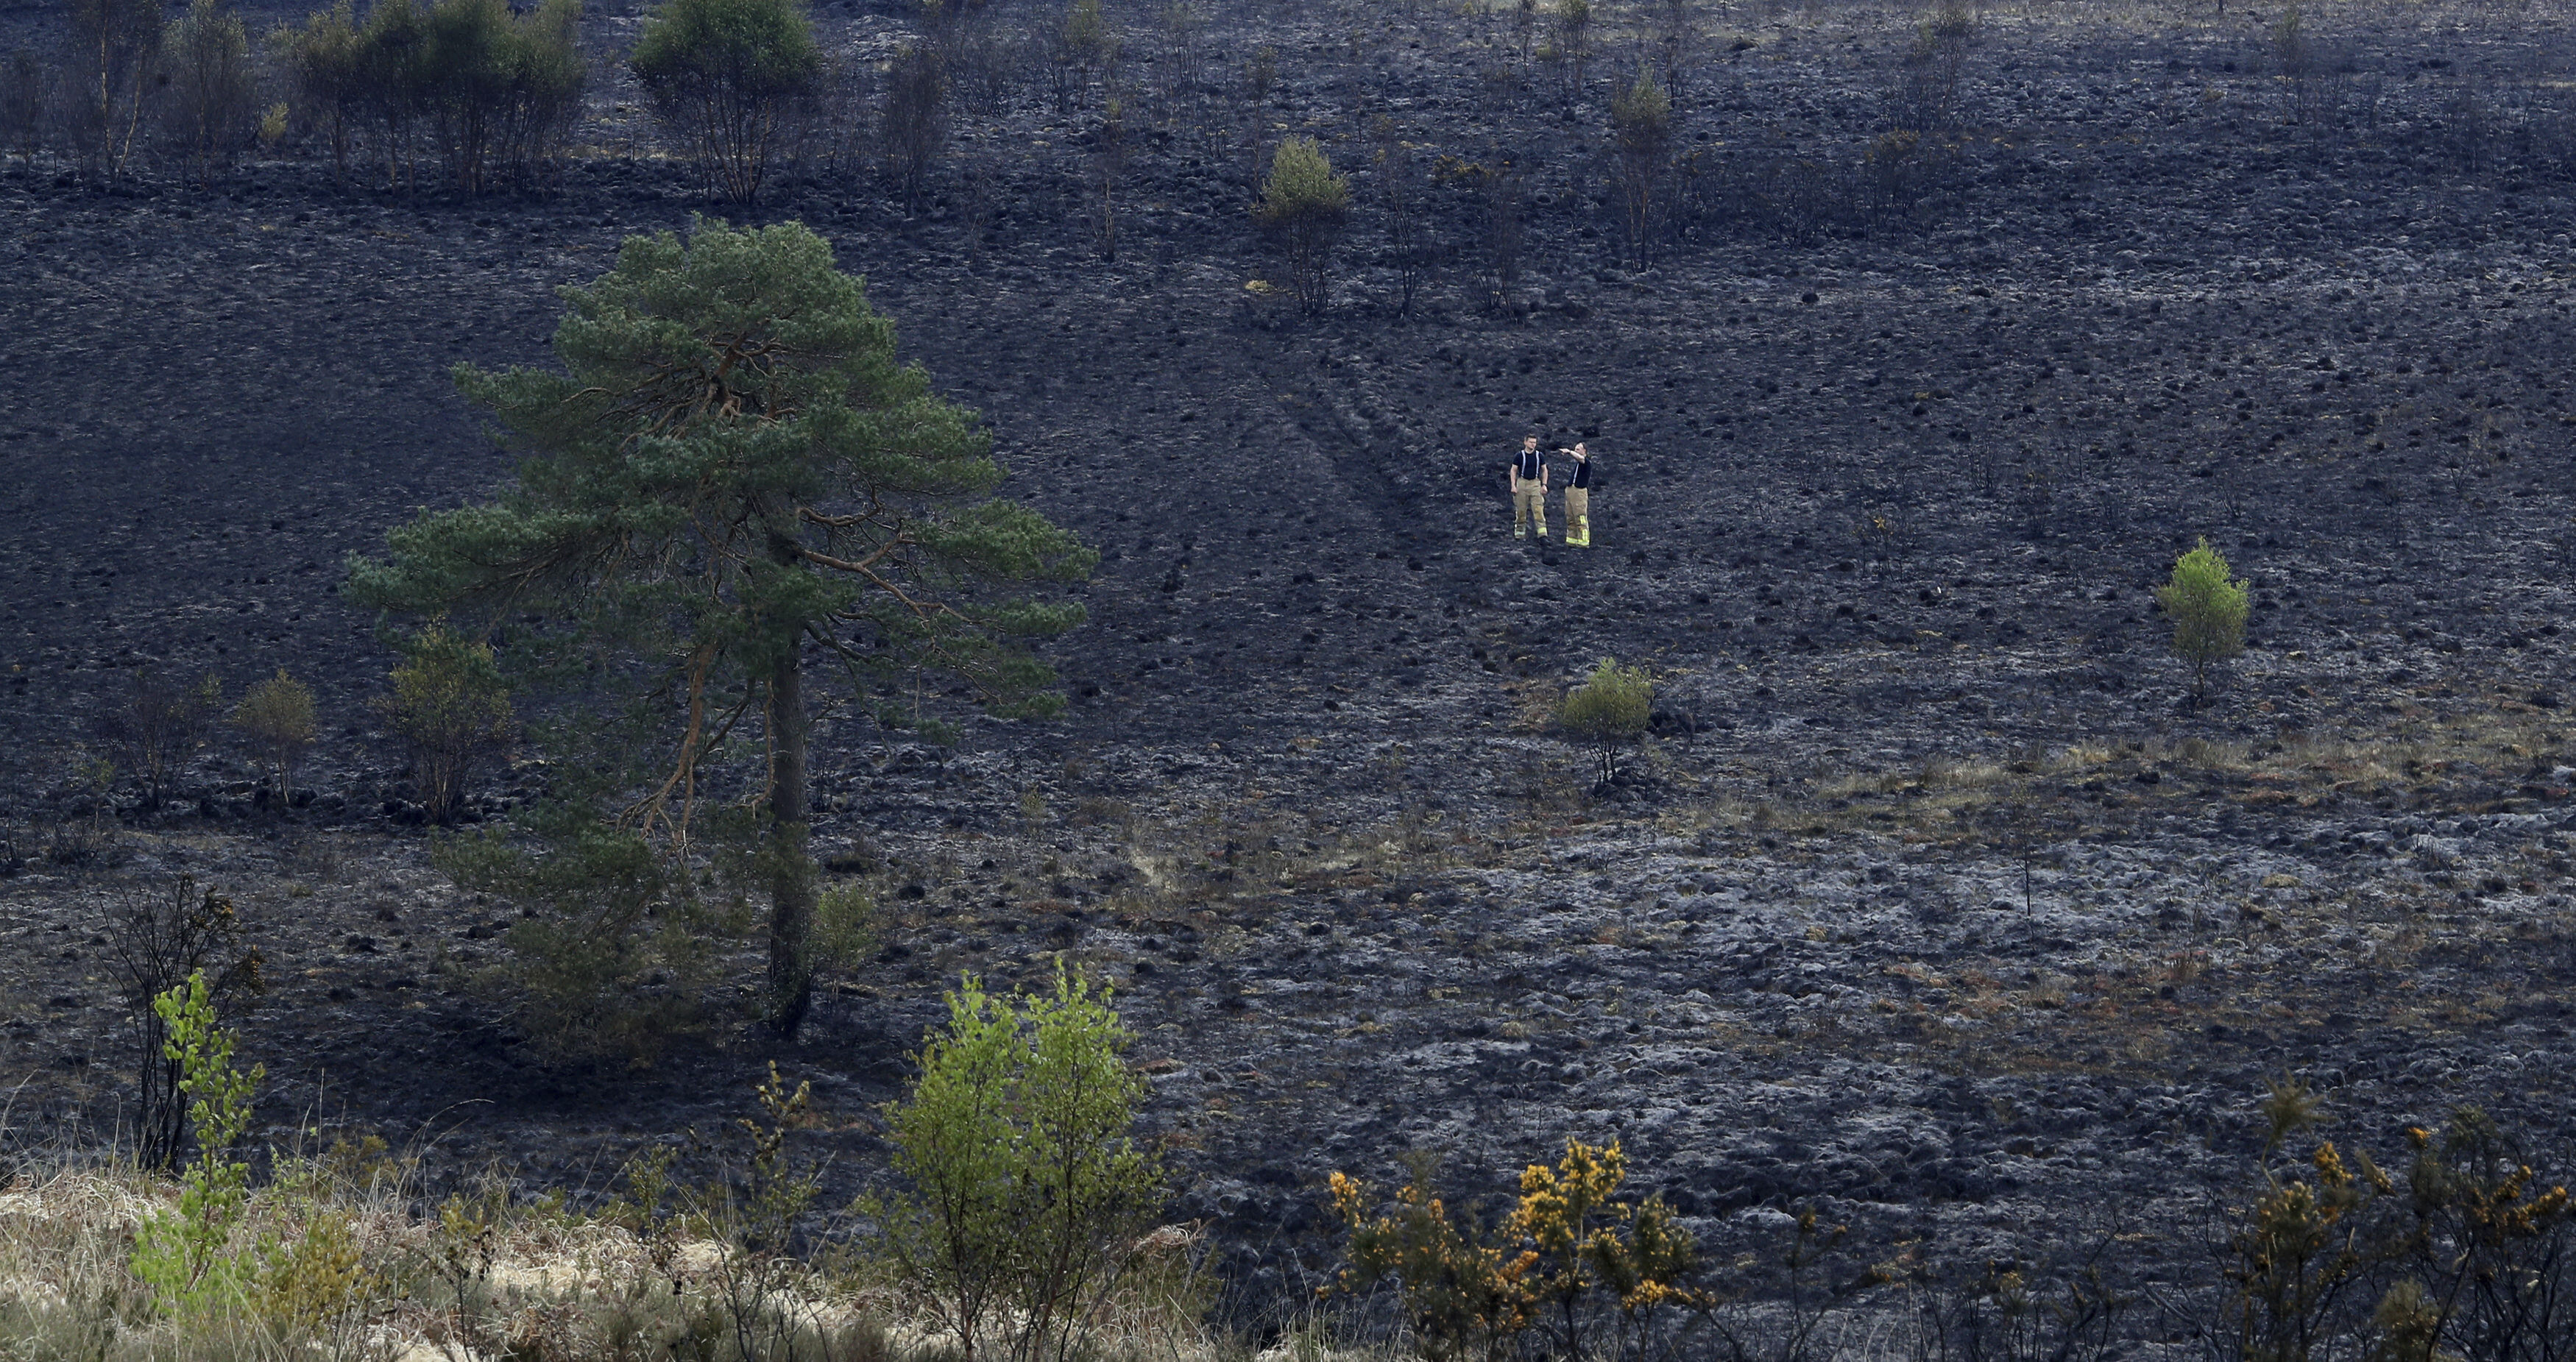 A burned portion of Ashdown Forest.